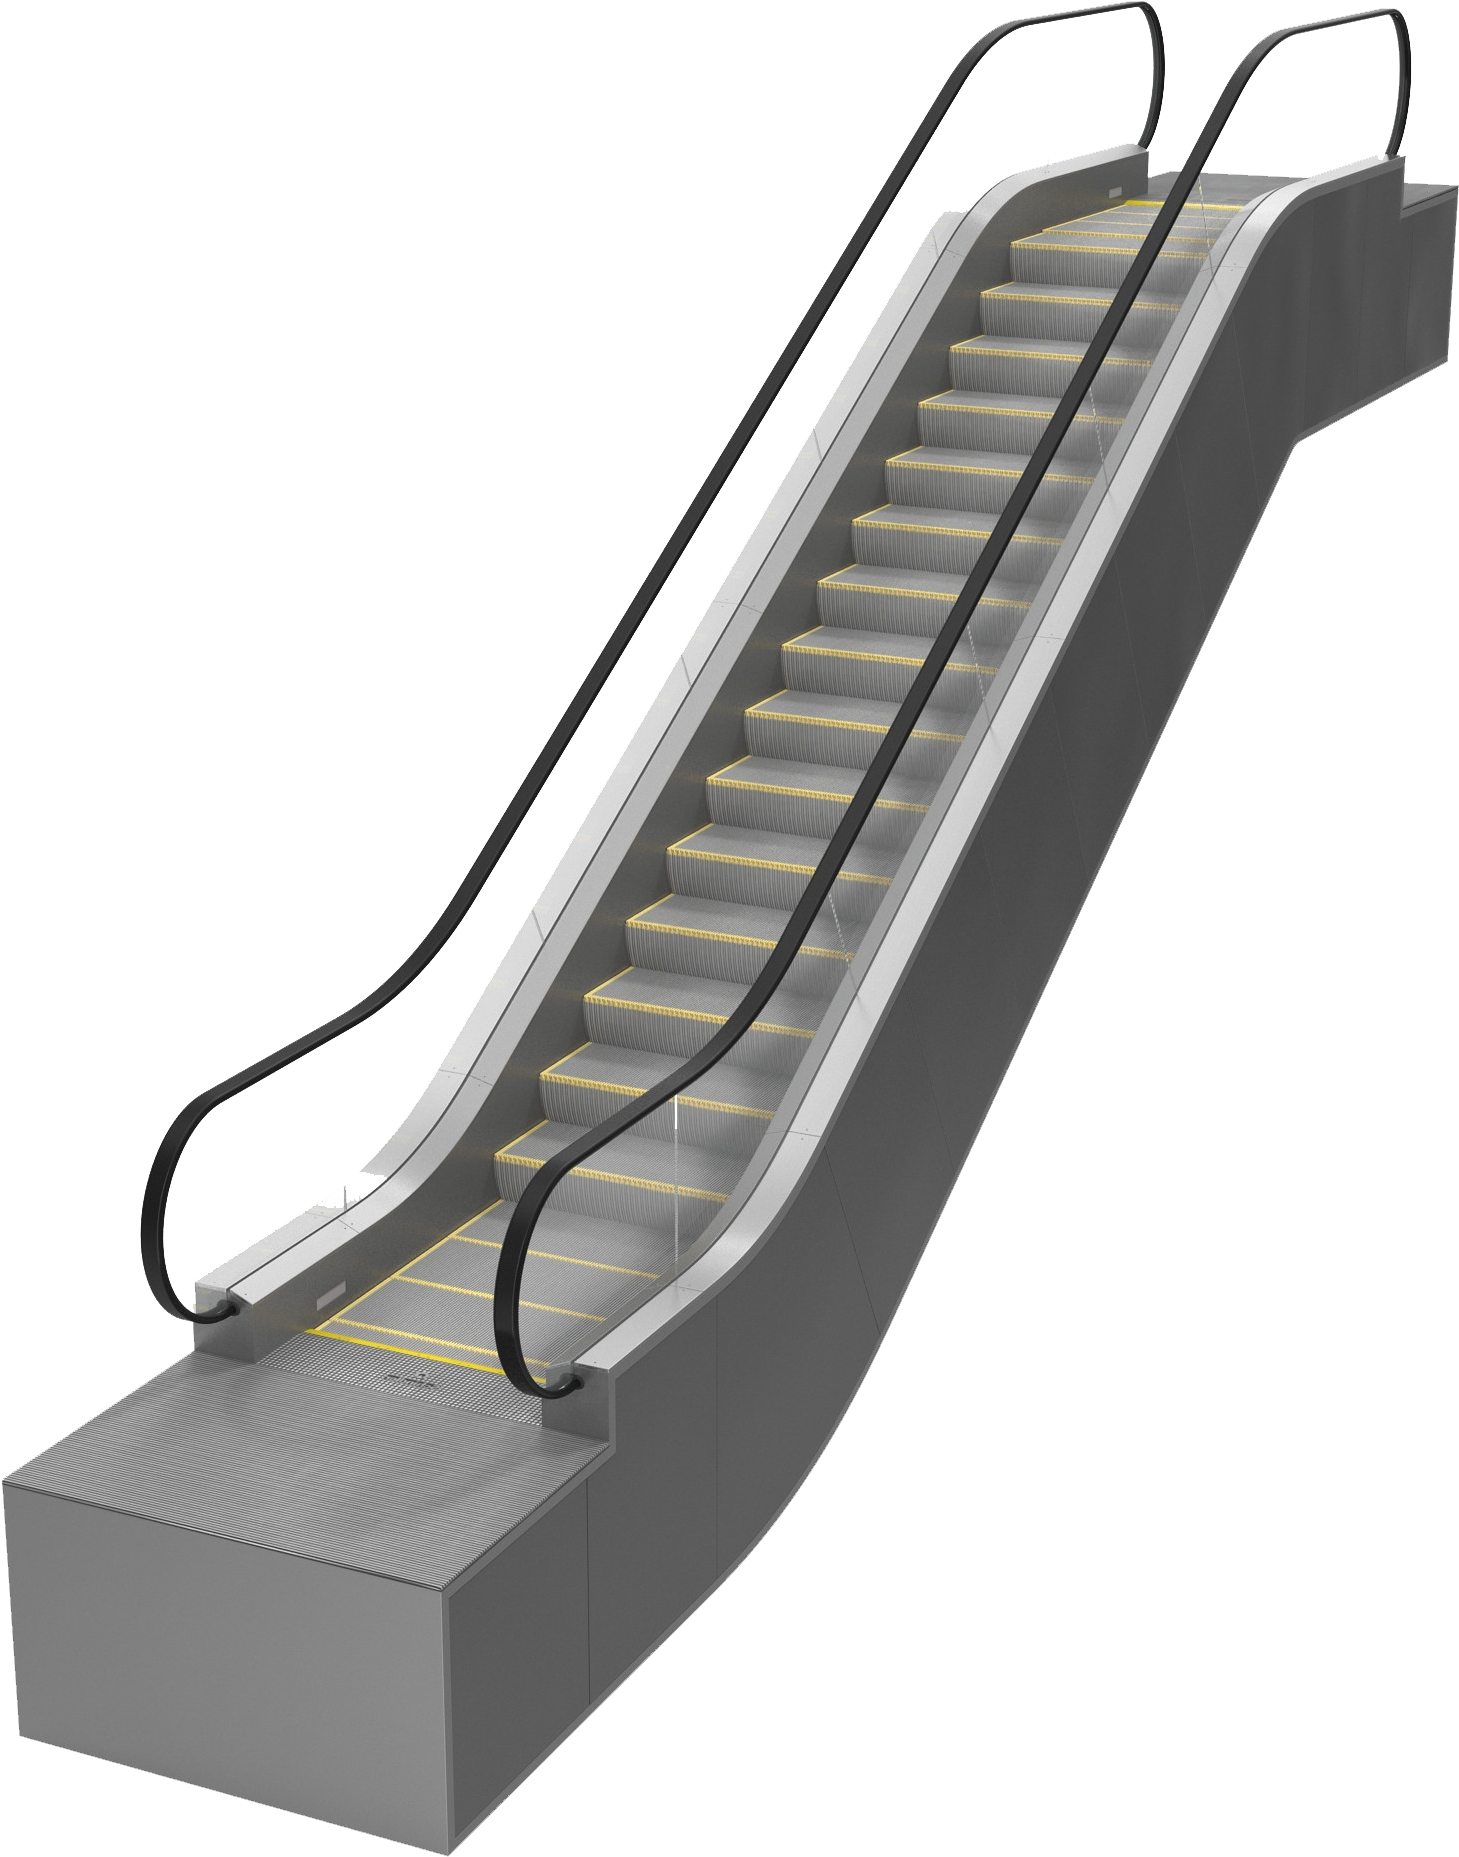 A Escalator With Yellow Markings